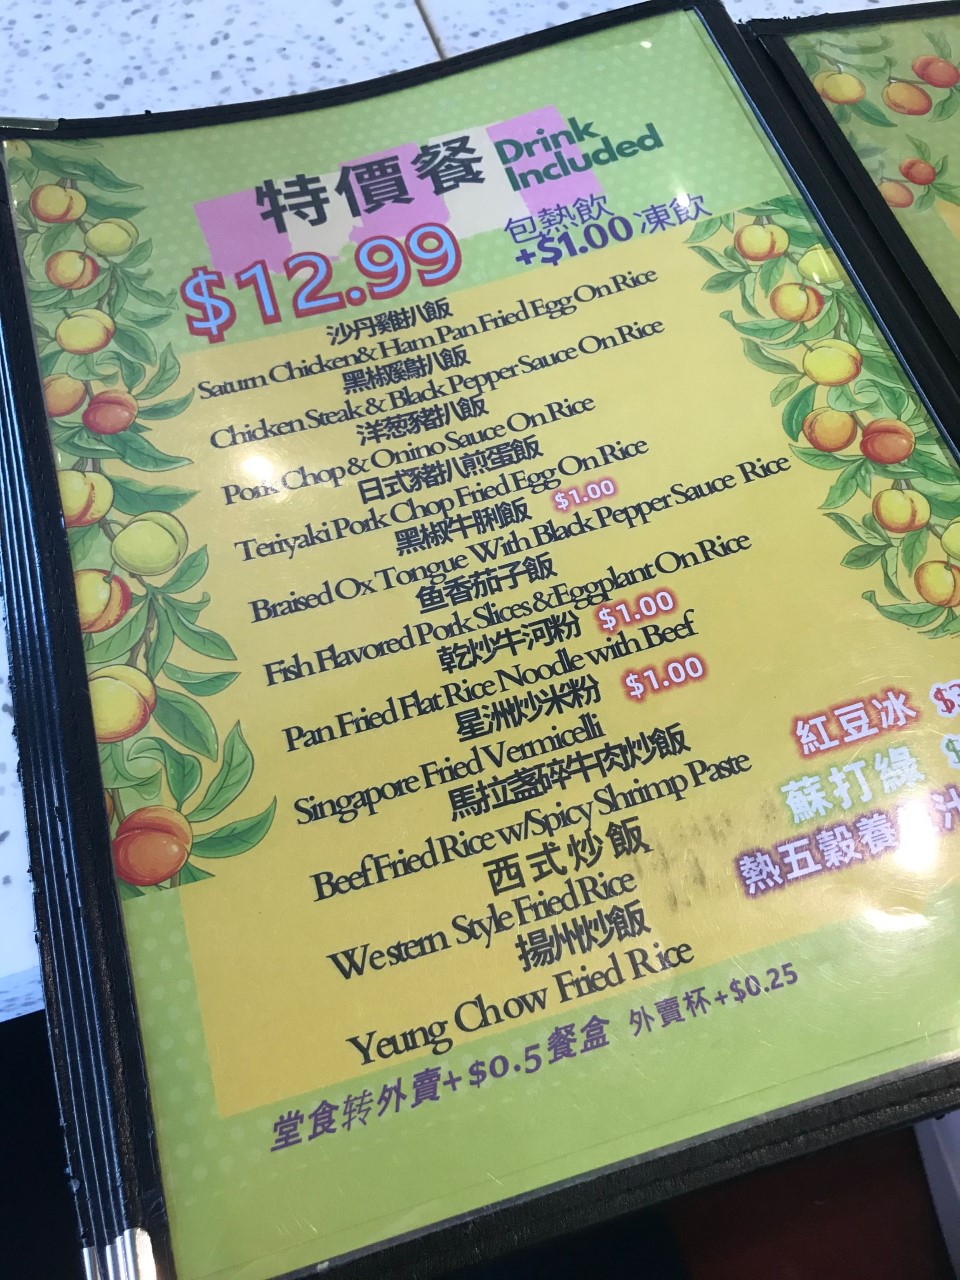 chinese and english food menu decorated with peaches. there is kinds of fried rice, rice with cutlet, stir fried noodles, and all come with a drink for 12.99. there are extra surcharges listed around the menu.